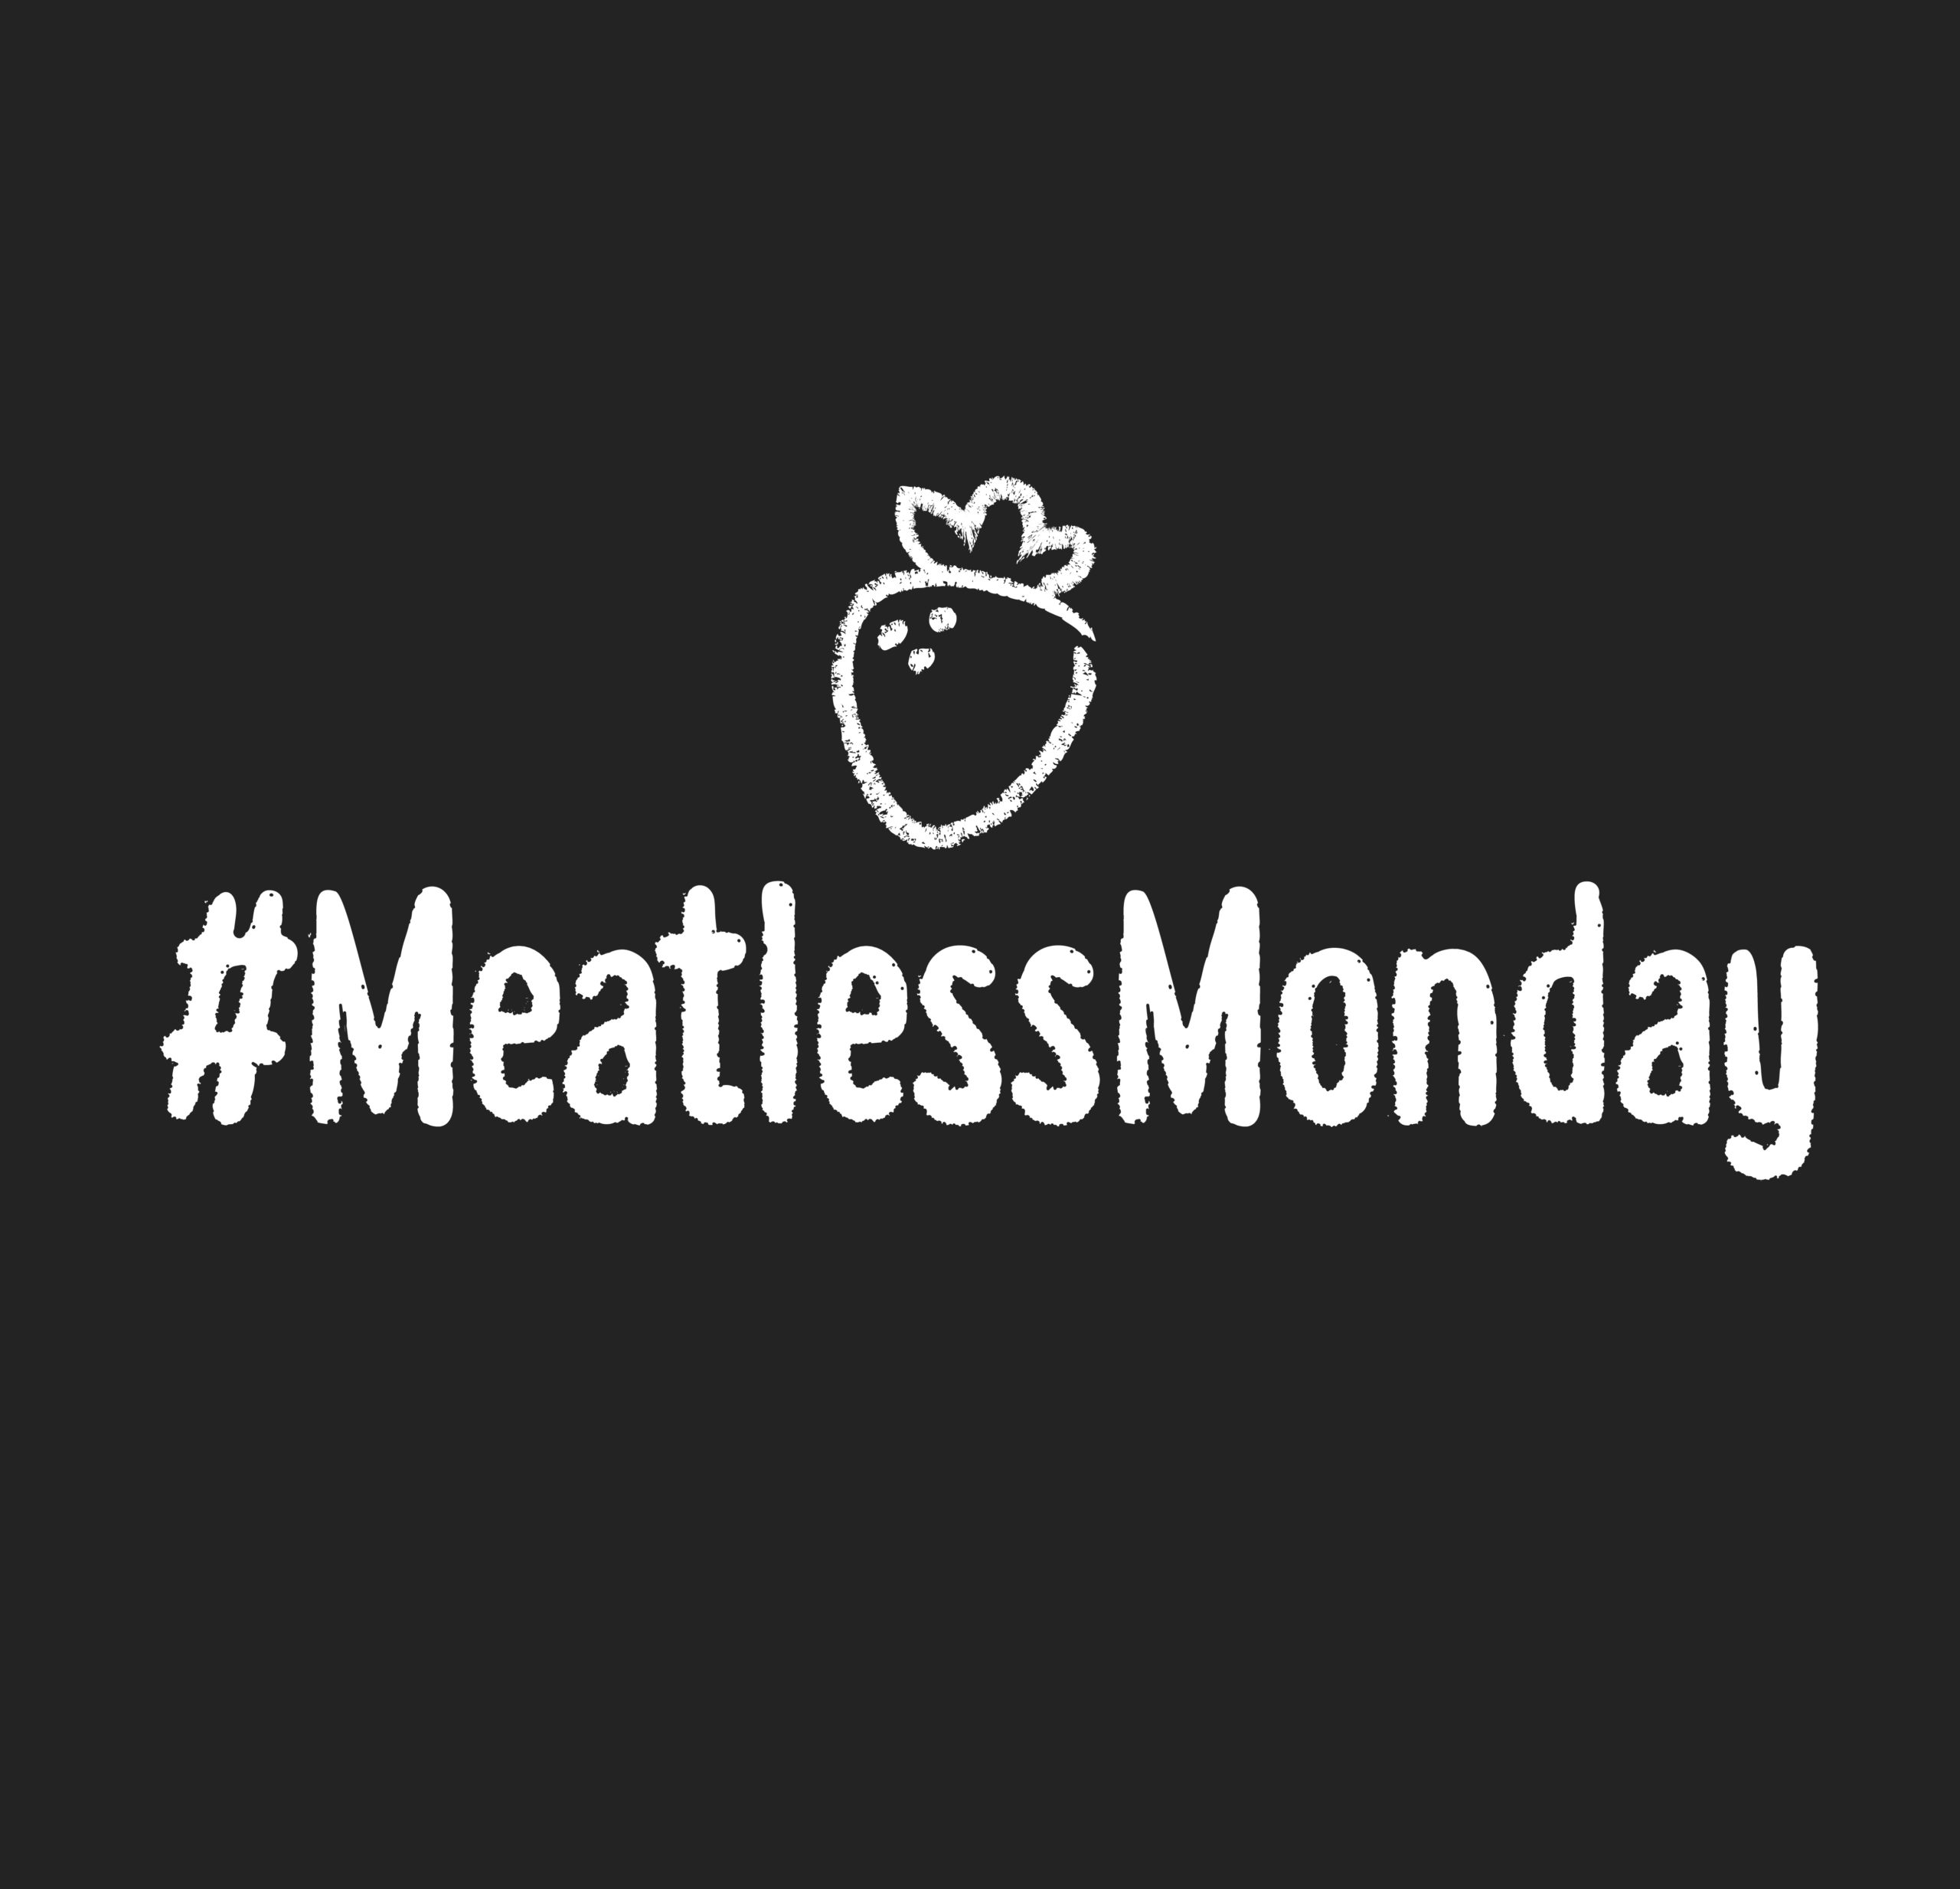 chalkboard background with white text that reads #meatlessmonday and a small illustrated strawberry above it